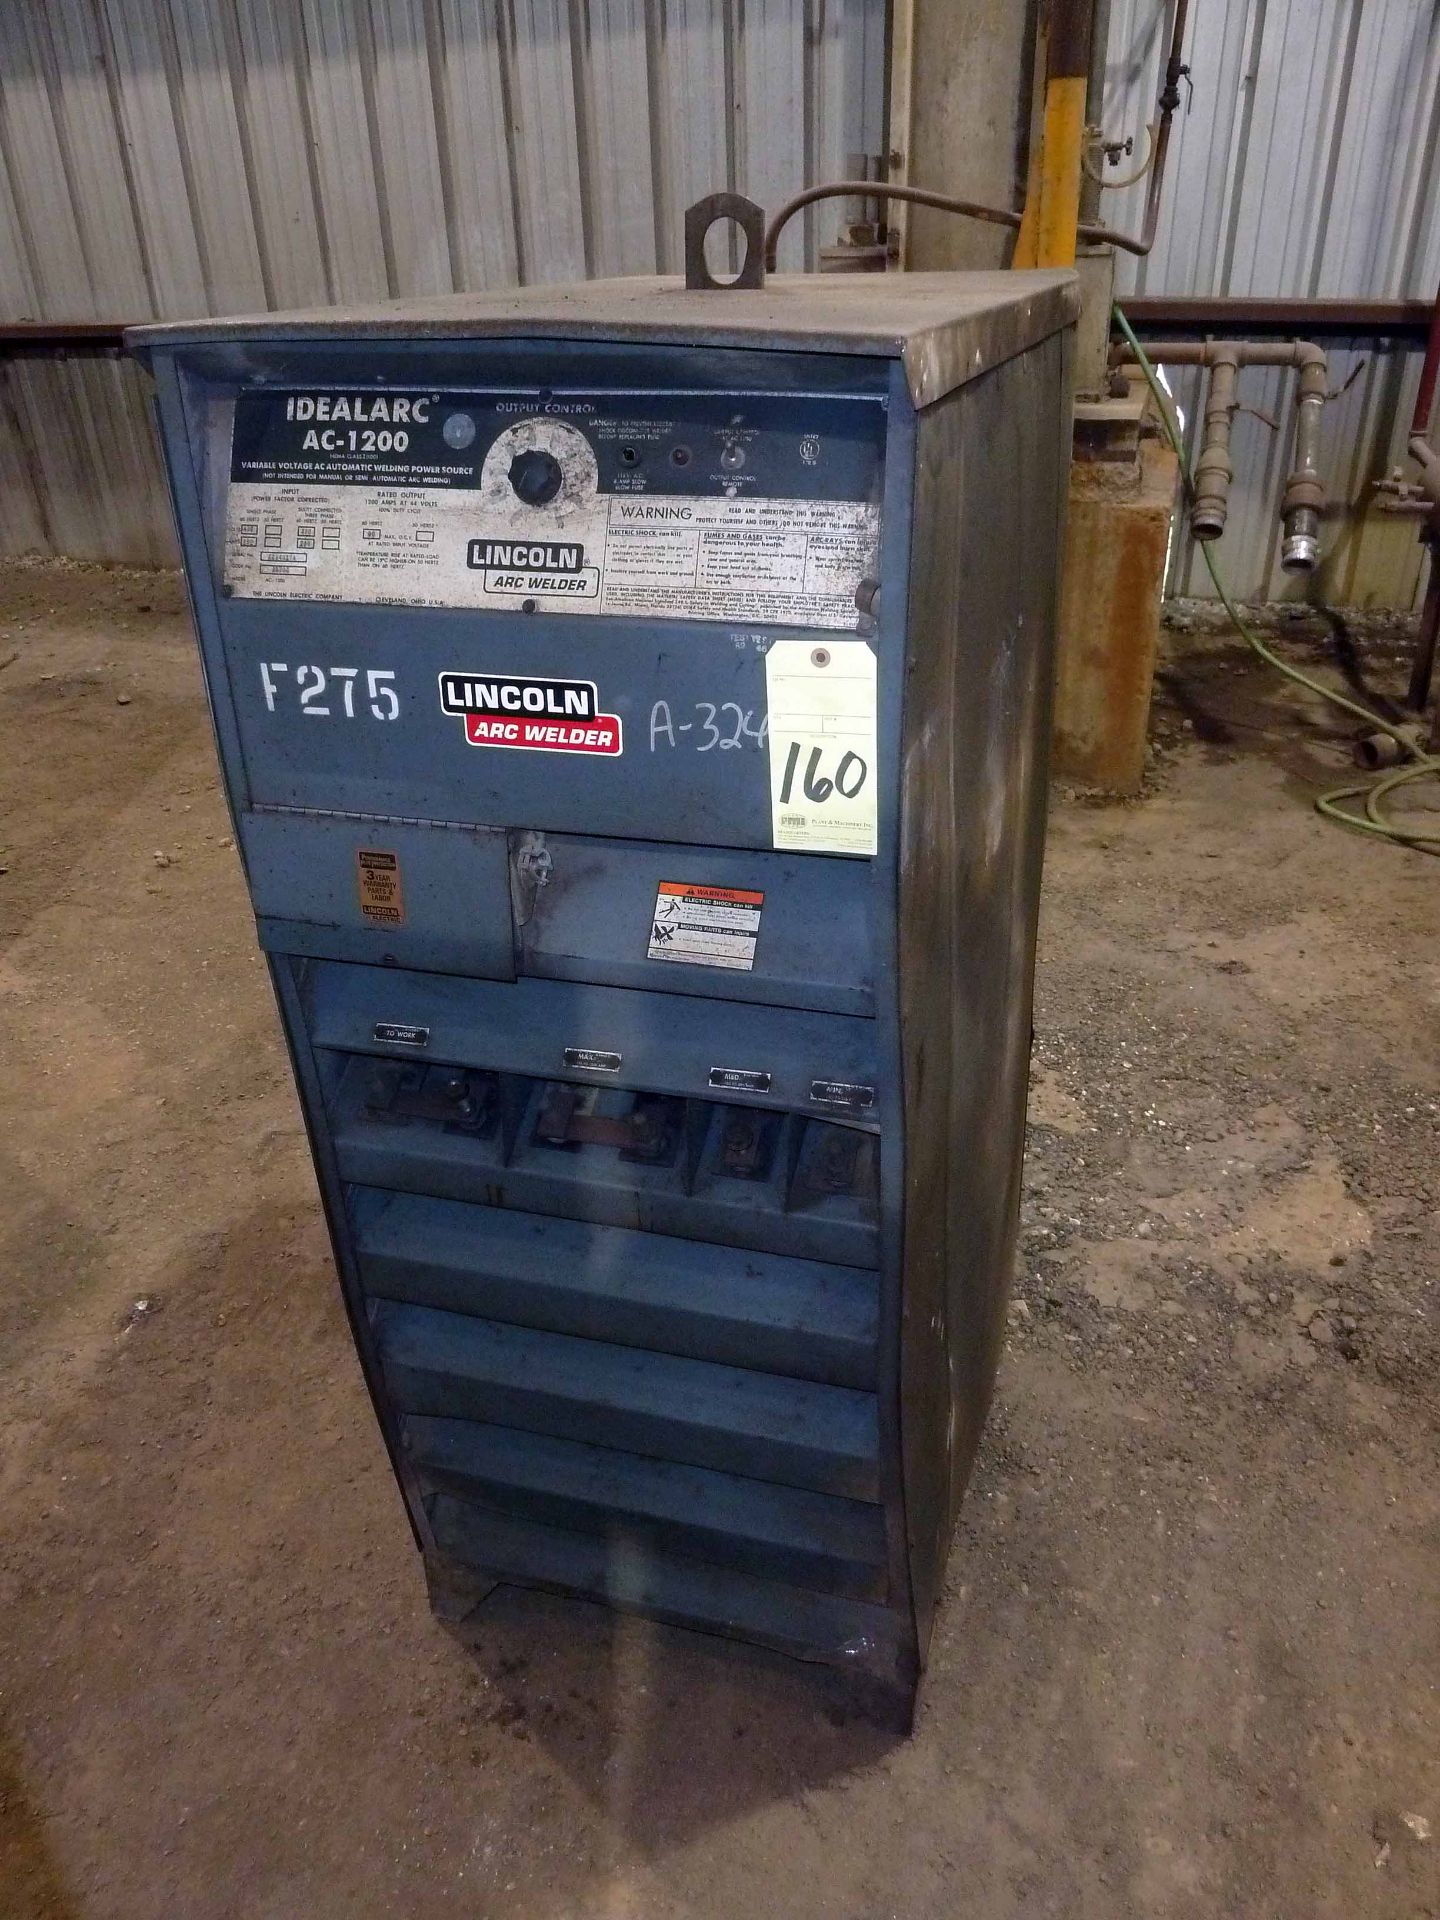 WELDING MACHINE, LINCOLN IDEALARC MDL. AC1200, 1,200 amps @ 44 v., 100% duty cycle, S/N AC846174